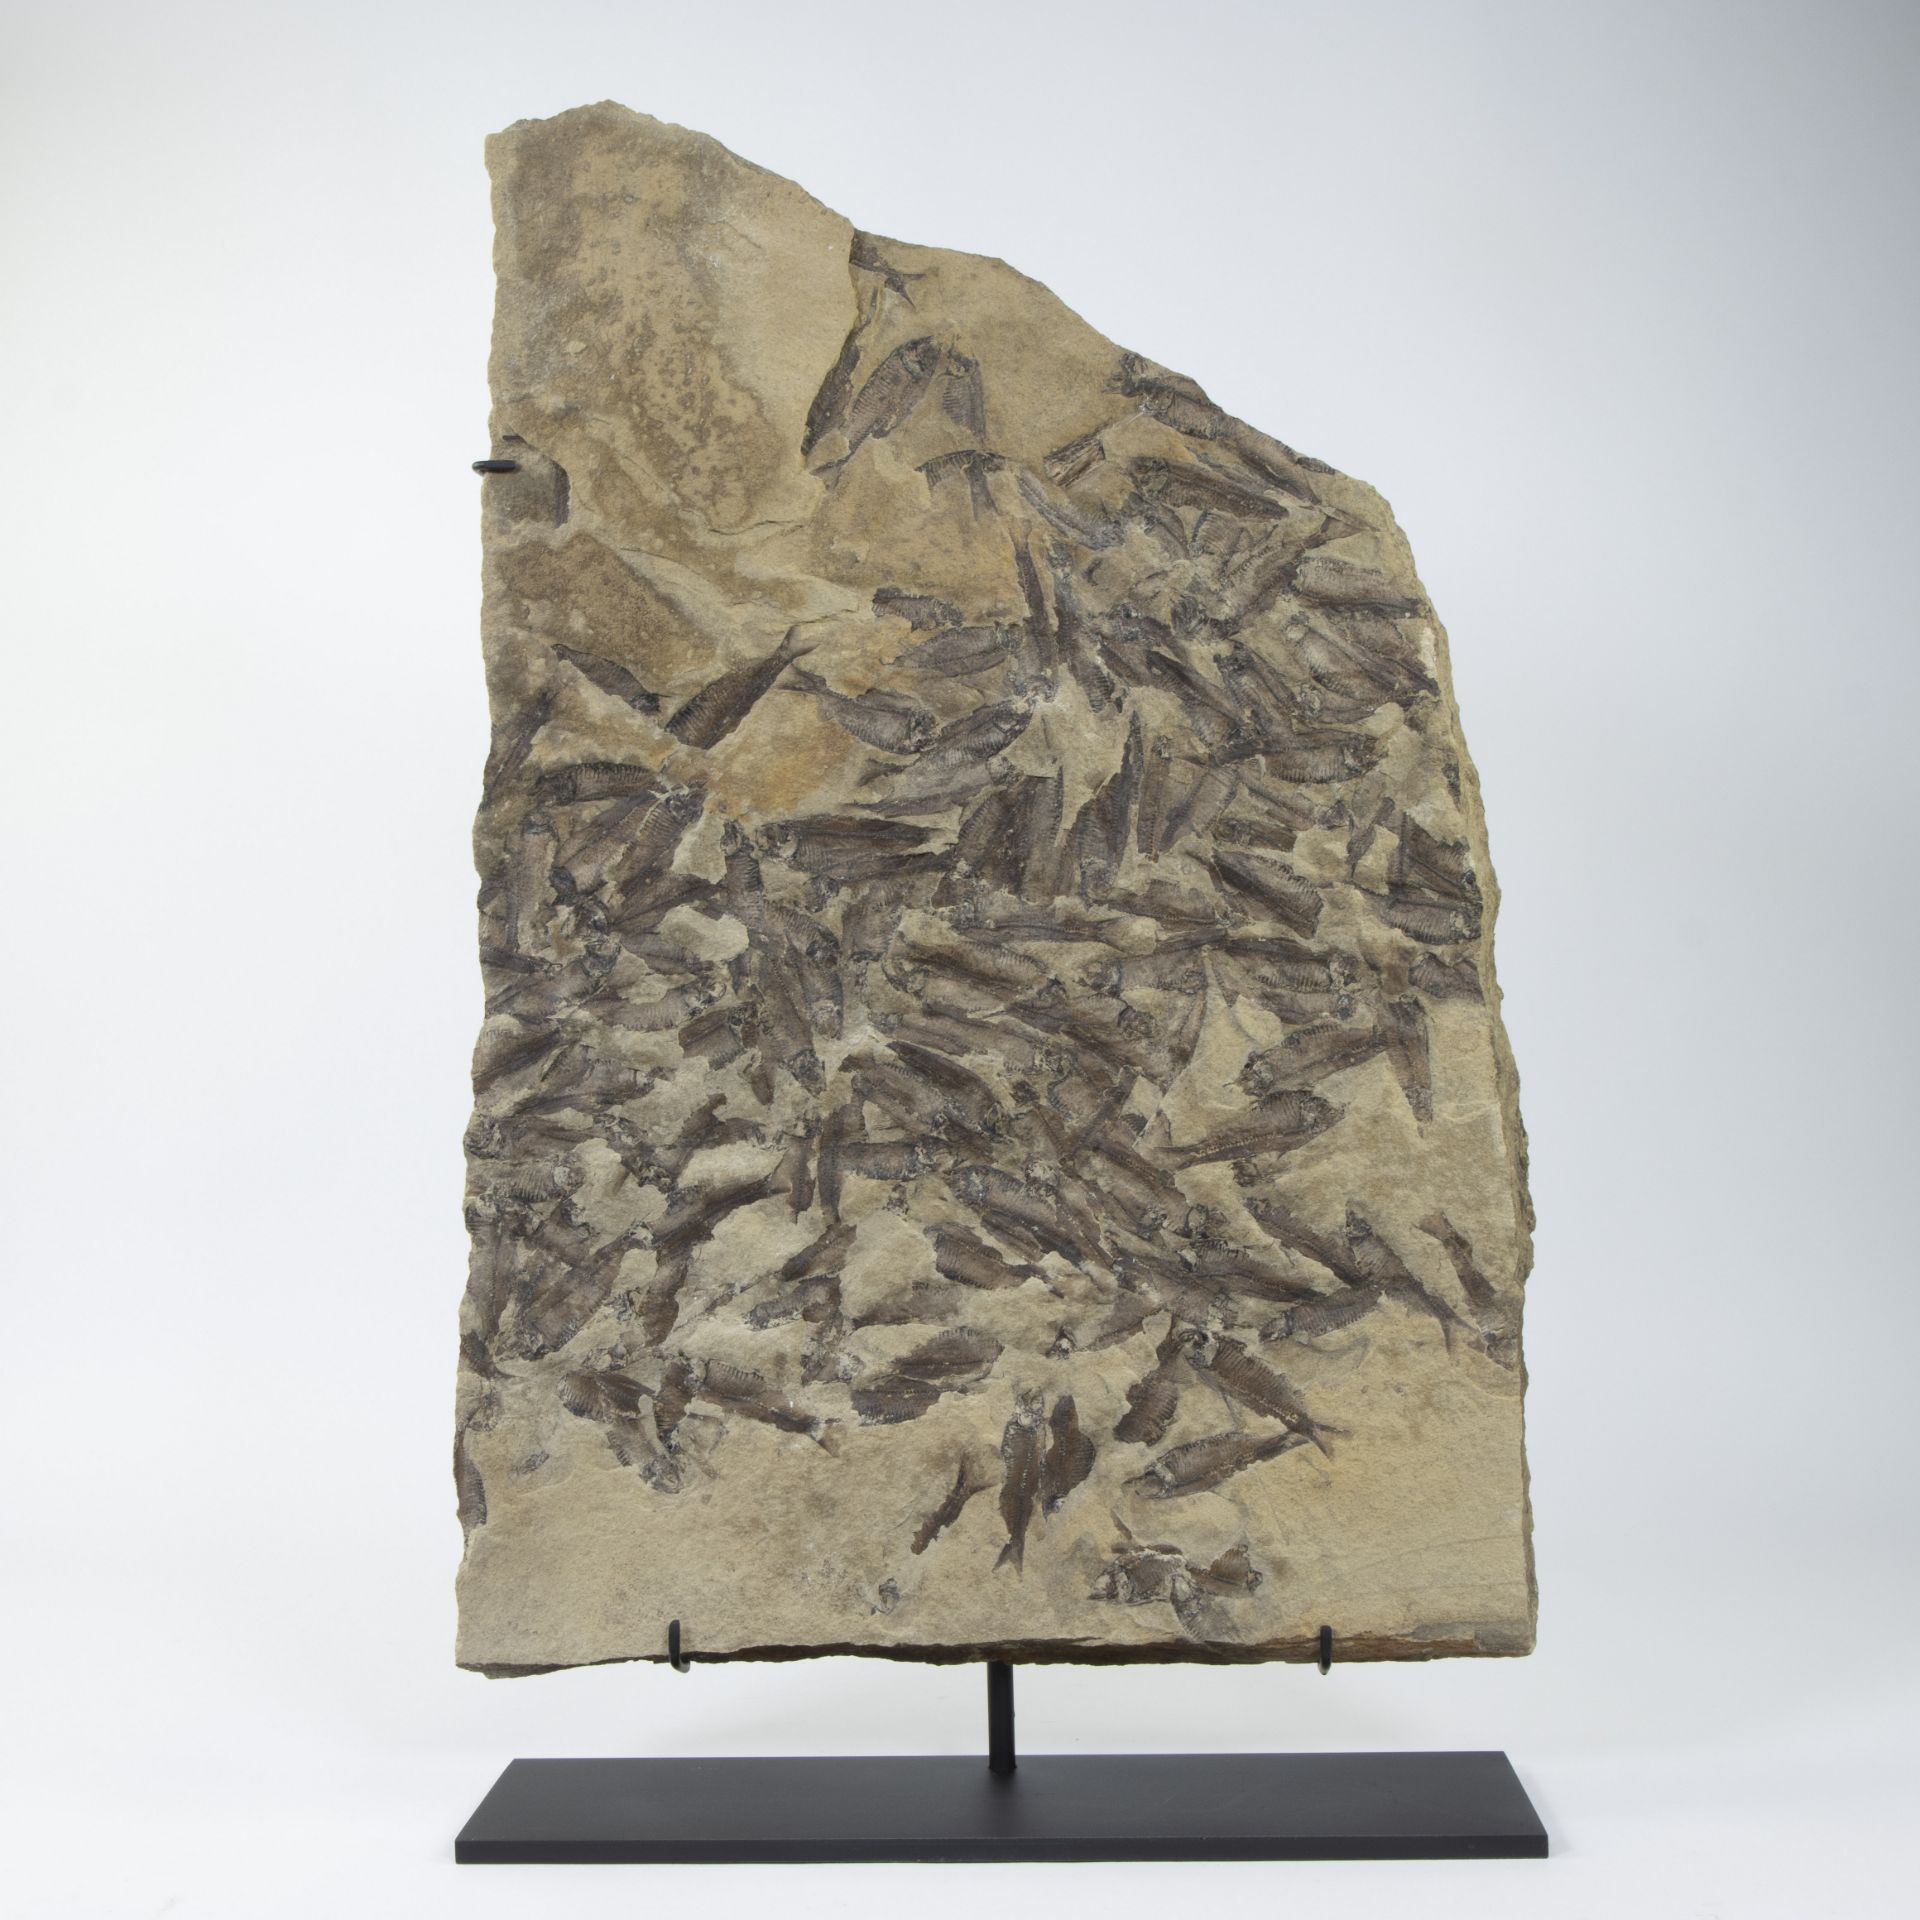 Plate with fossilised fishes, Gosiutichthys parvus, Eocene (48 million years) Green River Formation,